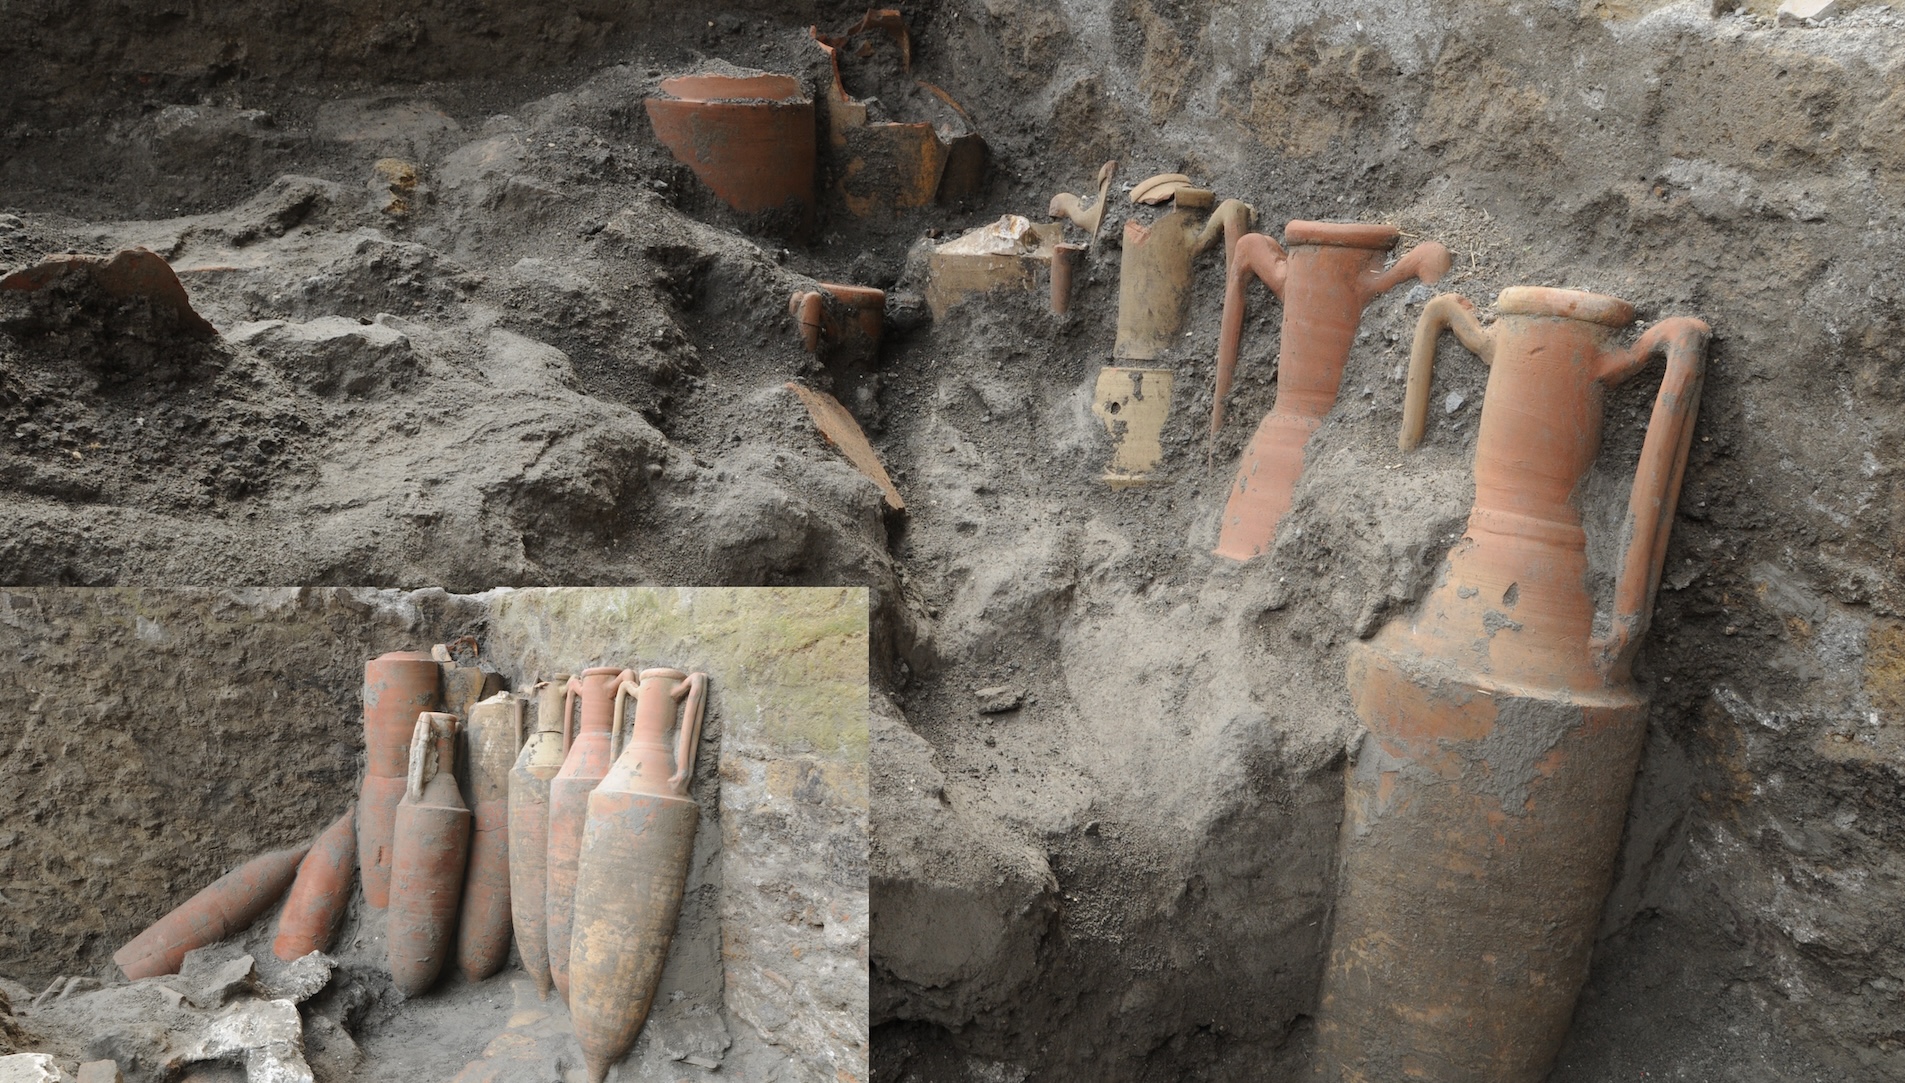 Amphorae unearthed at the Somma Vesuviana site.